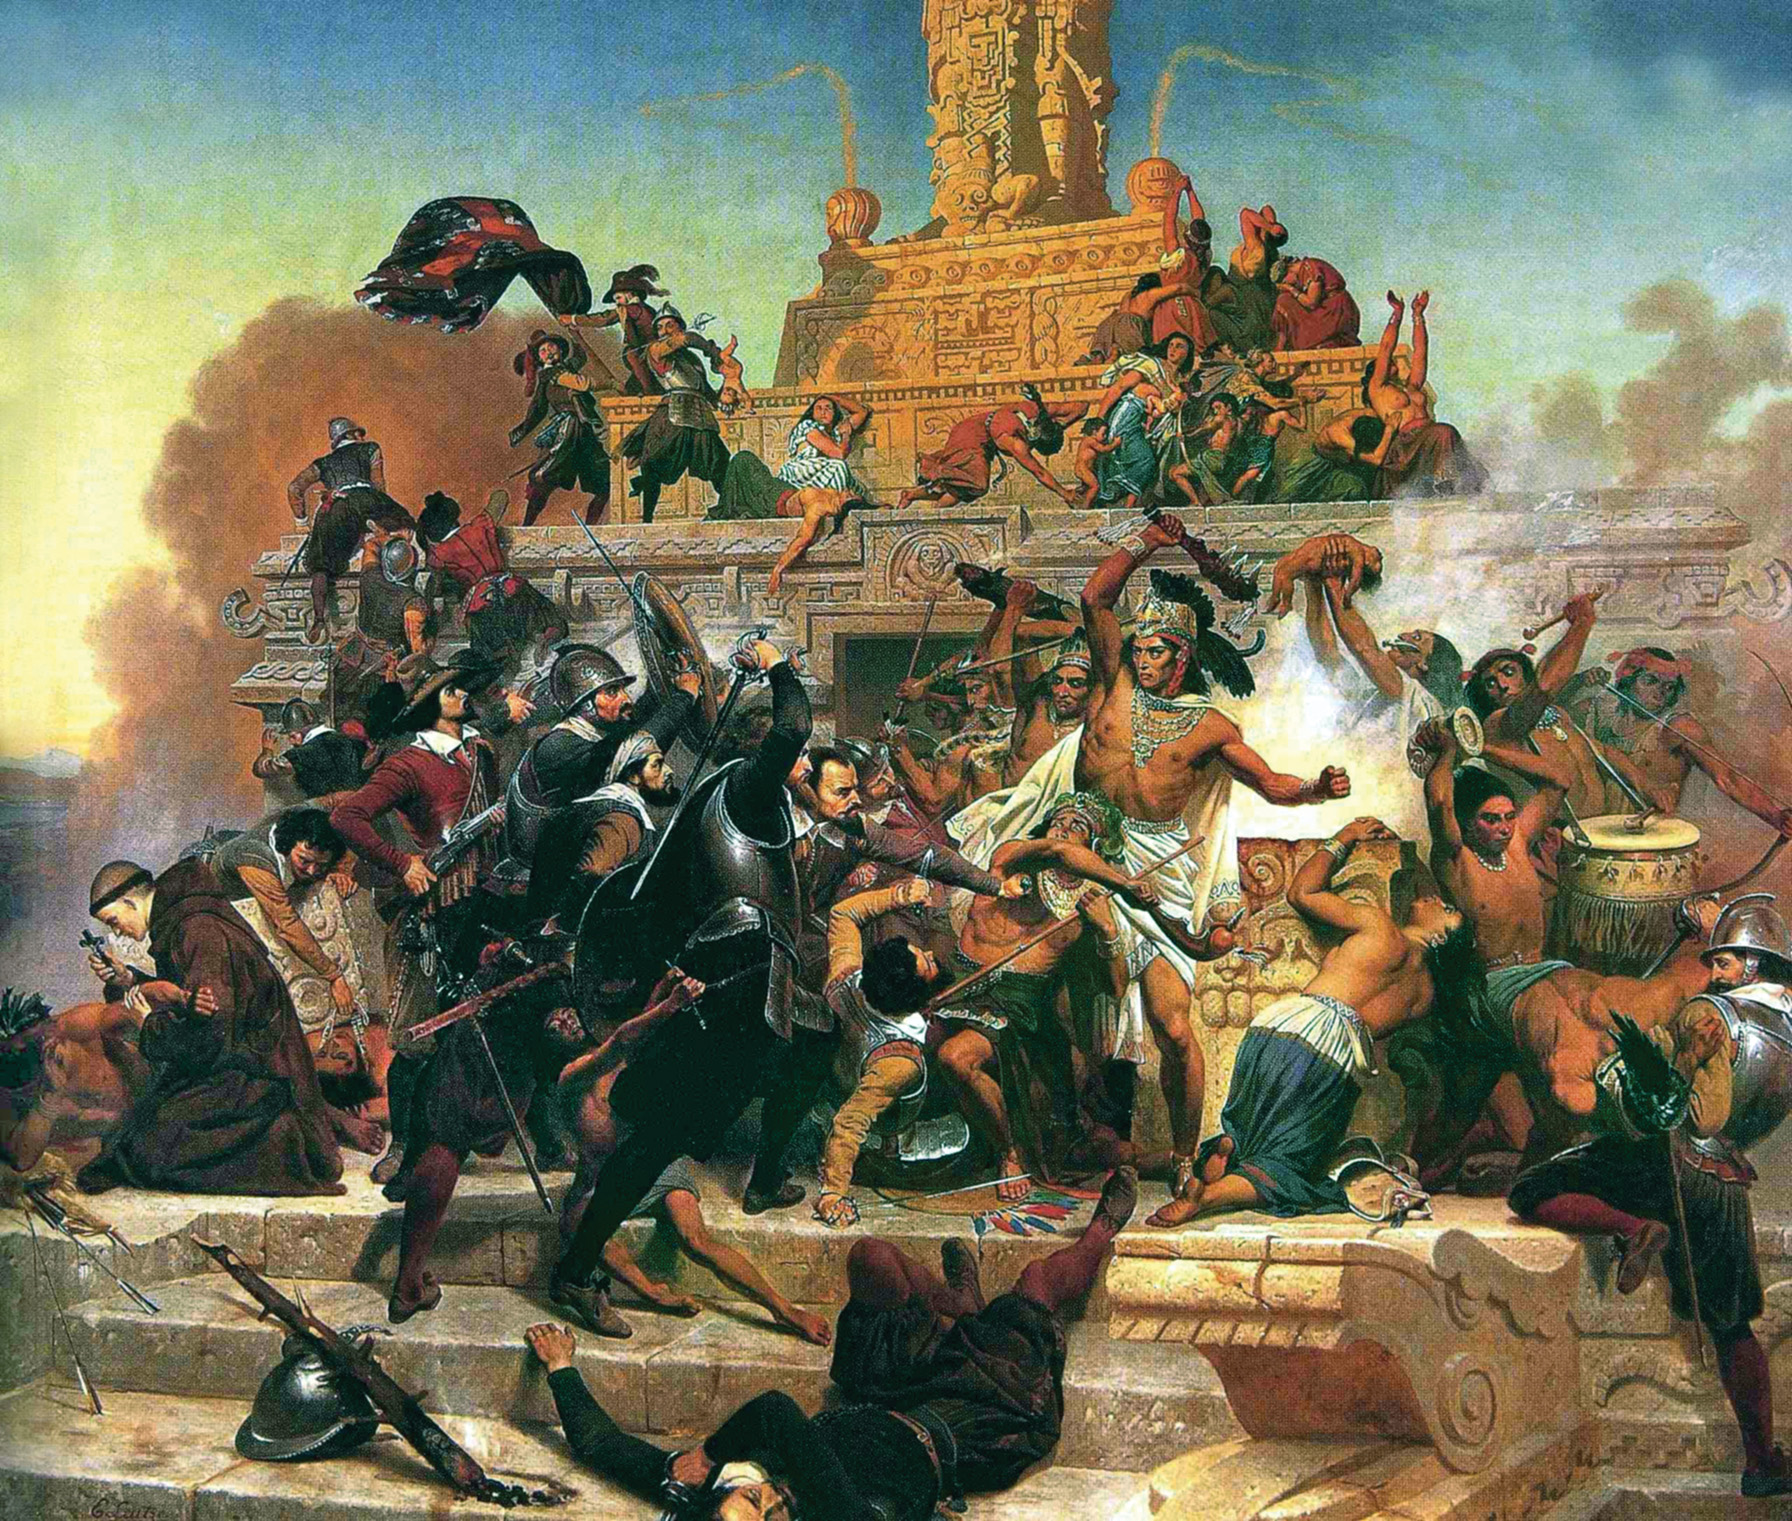 Aztec ruler Cuauthémoc fights heroically in a fanciful depiction of the final phase of the siege; in reality, the Spanish captured Cuauthémoc and his chief warriors as they tried to escape the city by canoe.